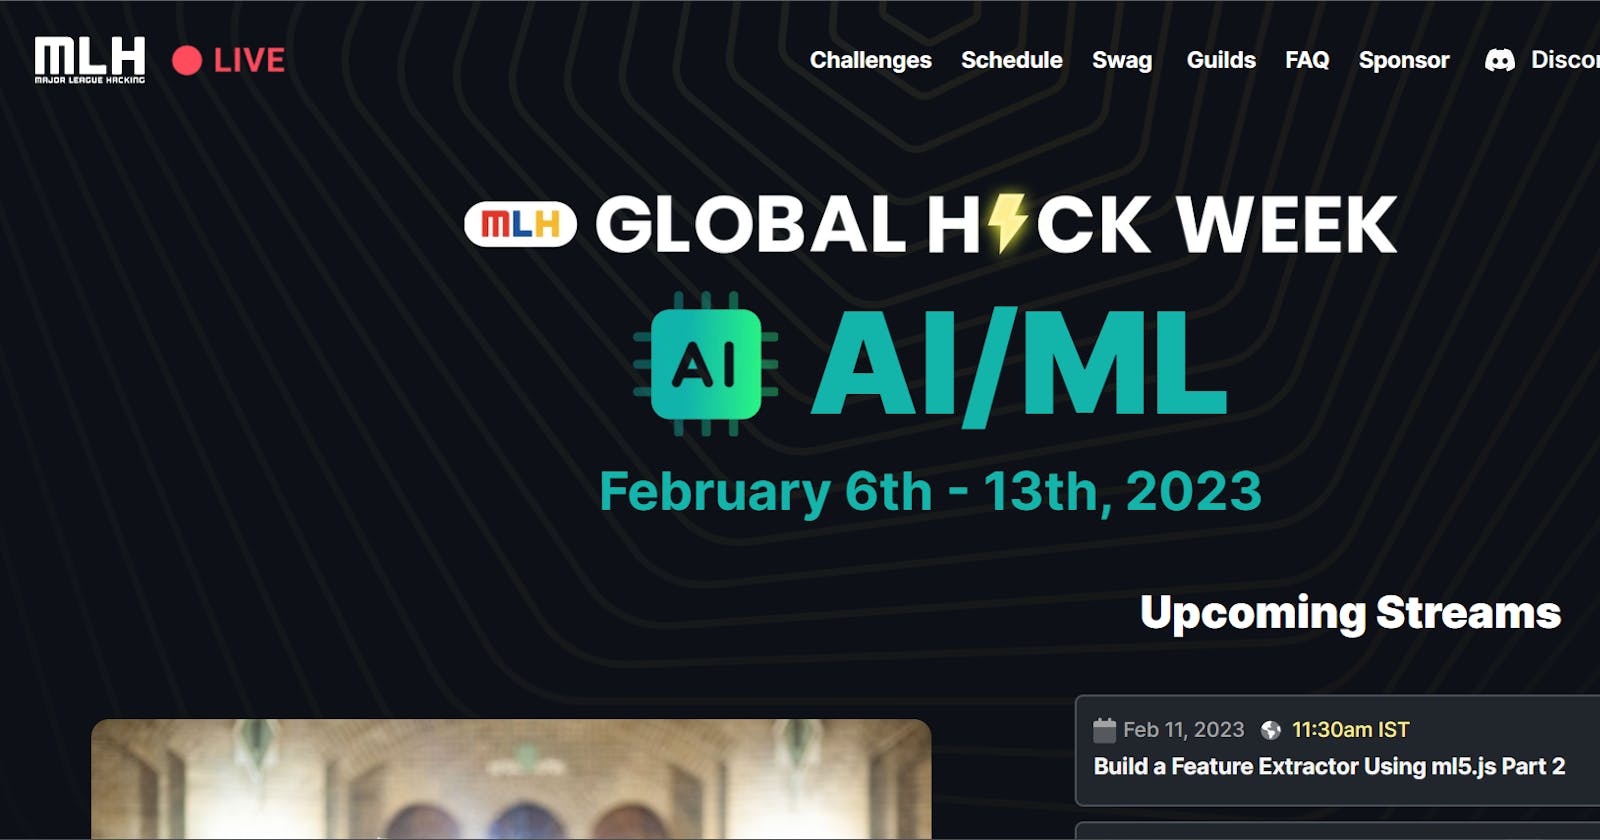 My Experience at GHW(AI/ML)